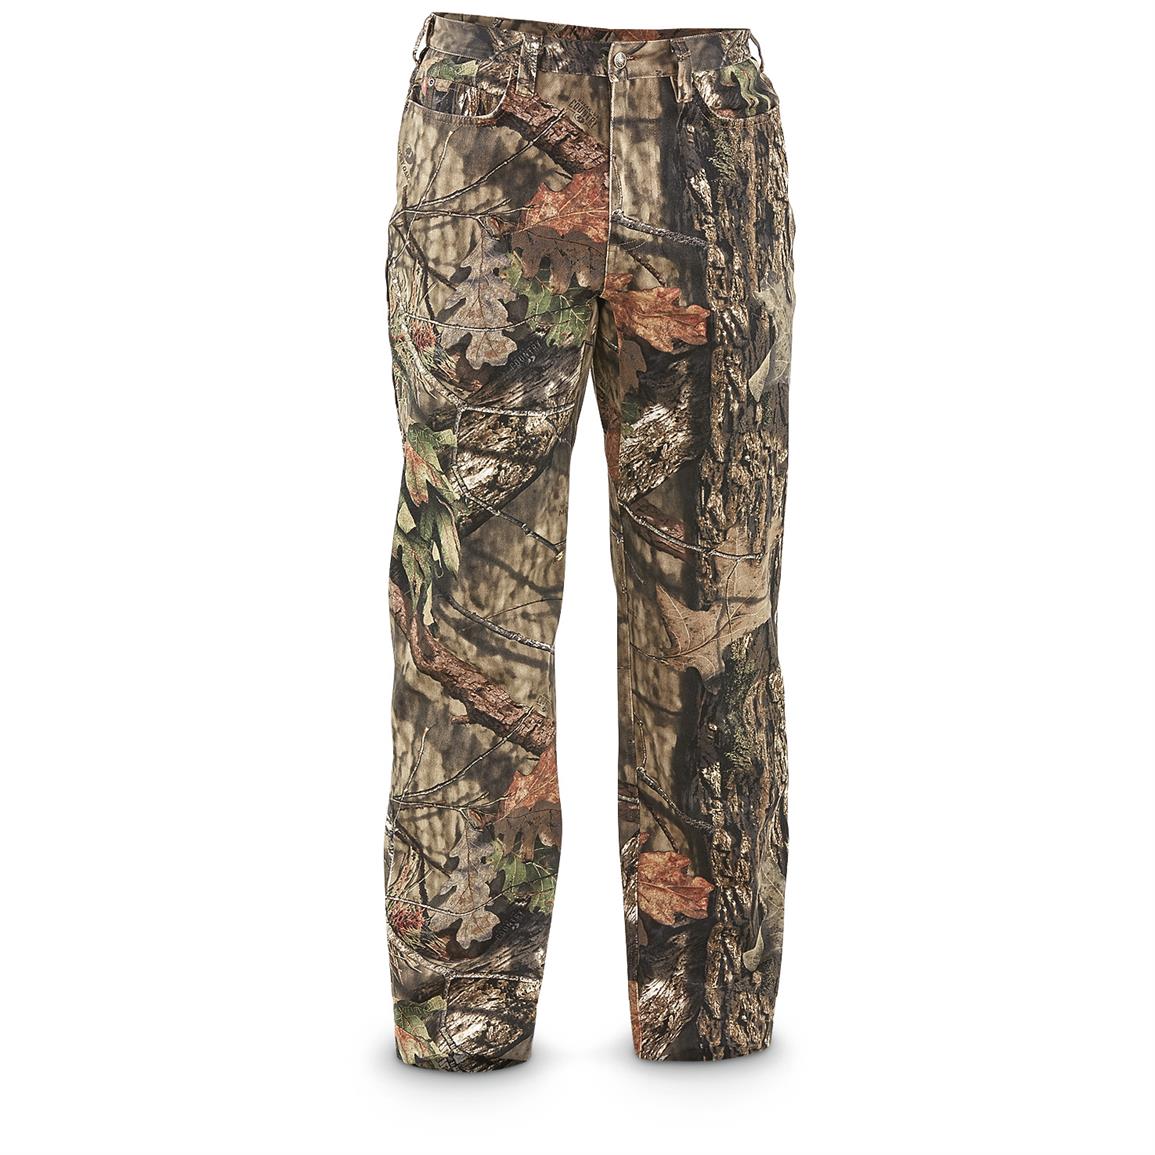 Guide Gear Camo 5-Pocket Jeans - 662996, Camo Pants at Sportsman's Guide